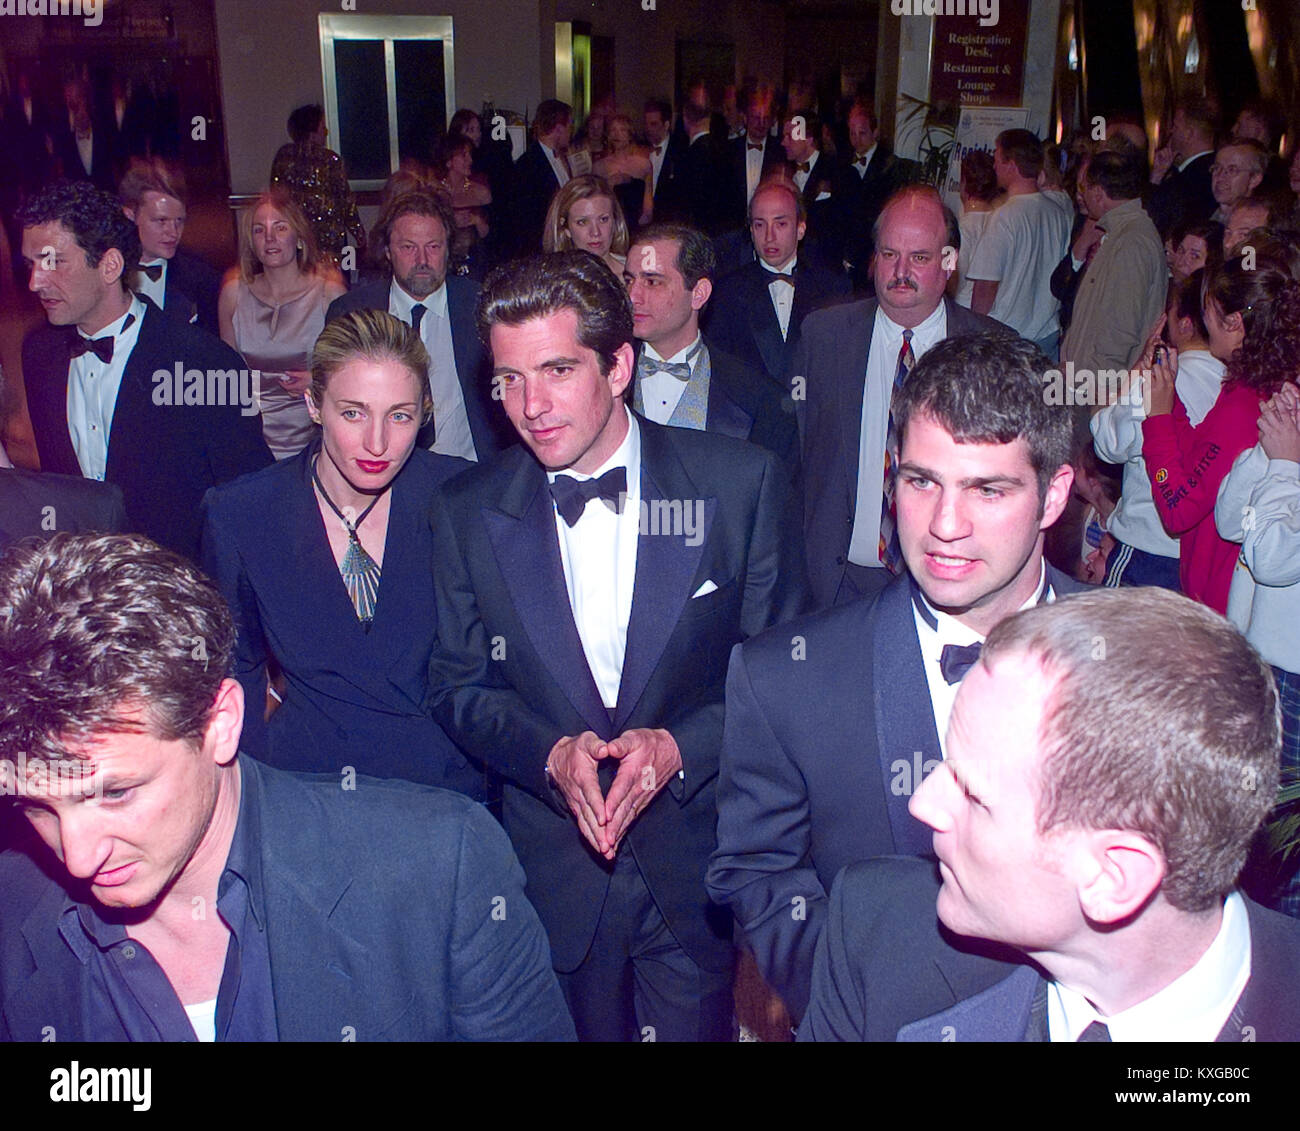 Actor Sean Penn, lower left, and John F. Kennedy, Jr. and his wife, Carolyn Bessette Kennedy depart the 1999 White House Correspondents Association Dinner at the Washington Hilton Hotel in Washington, DC on May 1, 1999. Credit: Ron Sachs/CNP - NO WIRE SERVICE · Photo: Ron Sachs/Consolidated News Photos/Ron Sachs - CNP Stock Photo